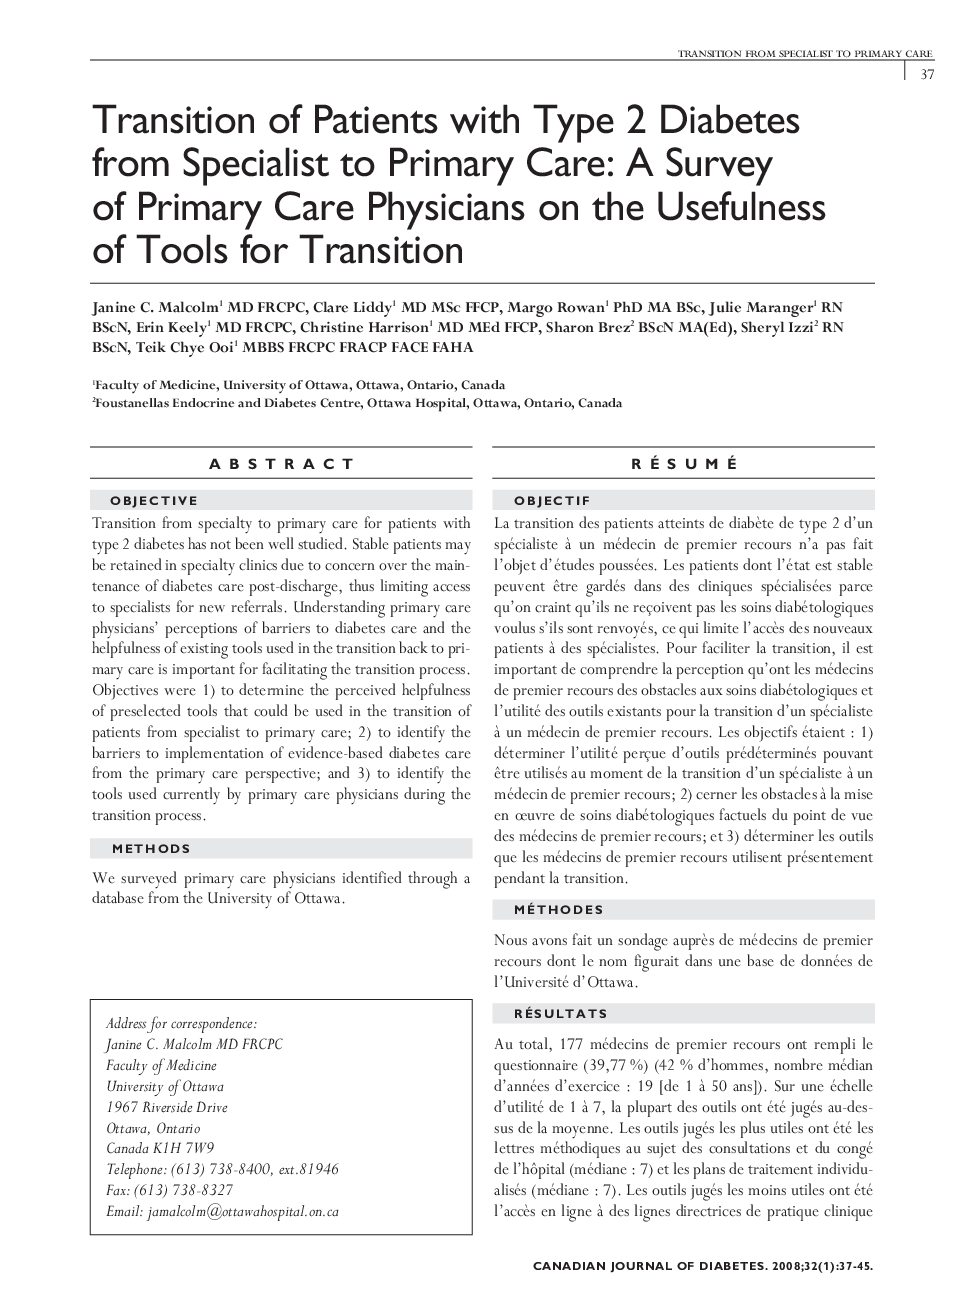 Transition of Patients with Type 2 Diabetes from Specialist to Primary Care: A Survey of Primary Care Physicians on the Usefulness of Tools for Transition